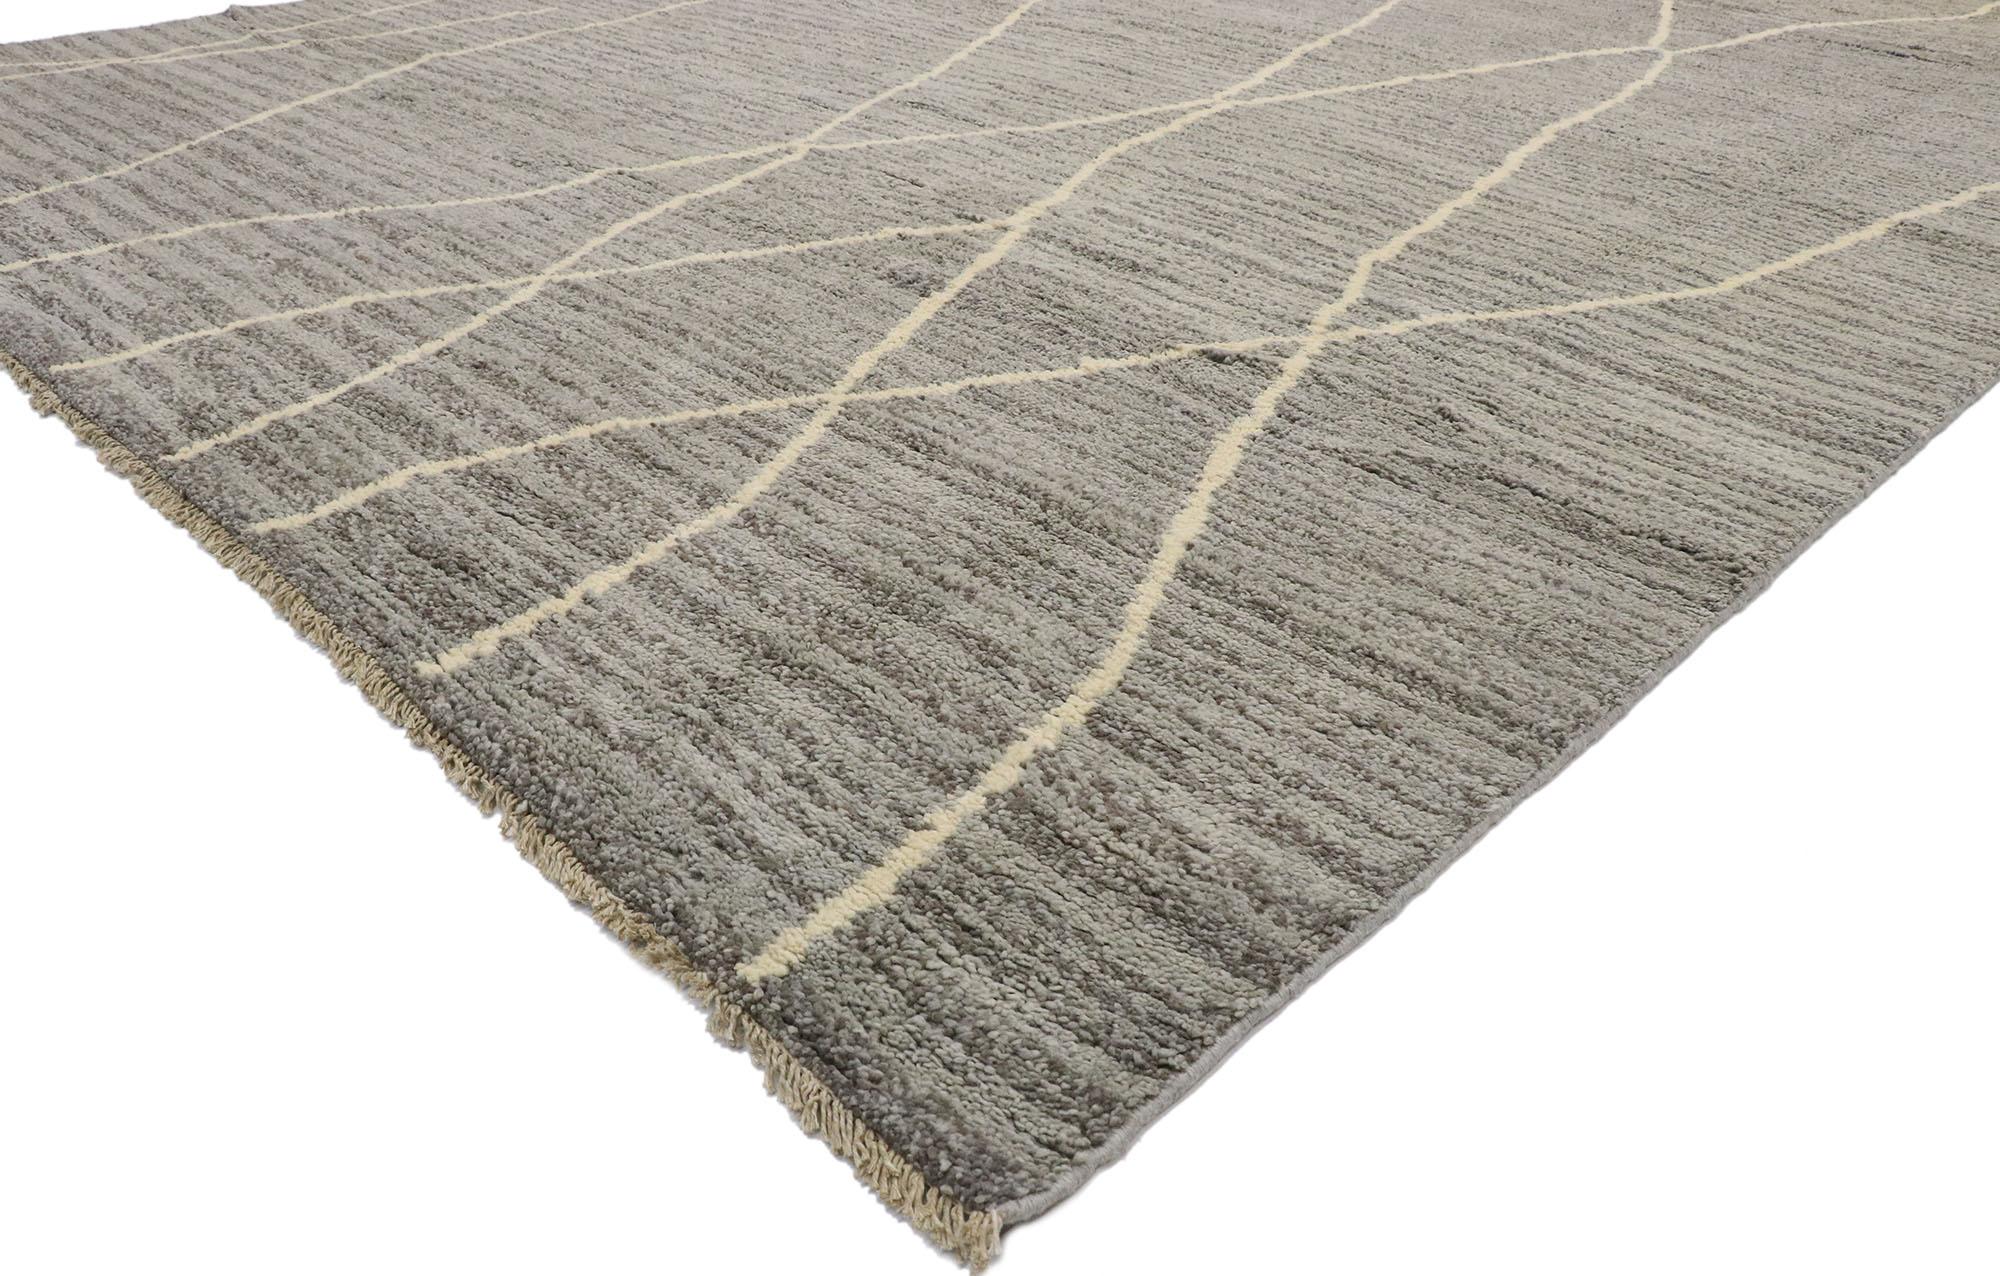 80649, new contemporary gray Moroccan rug with modern Swedish Mysigt style. Luminous gray hues and rich waves of Abrash create an endless fascinating effect in this hand knotted wool contemporary Moroccan style area rug. Delicate beige lines